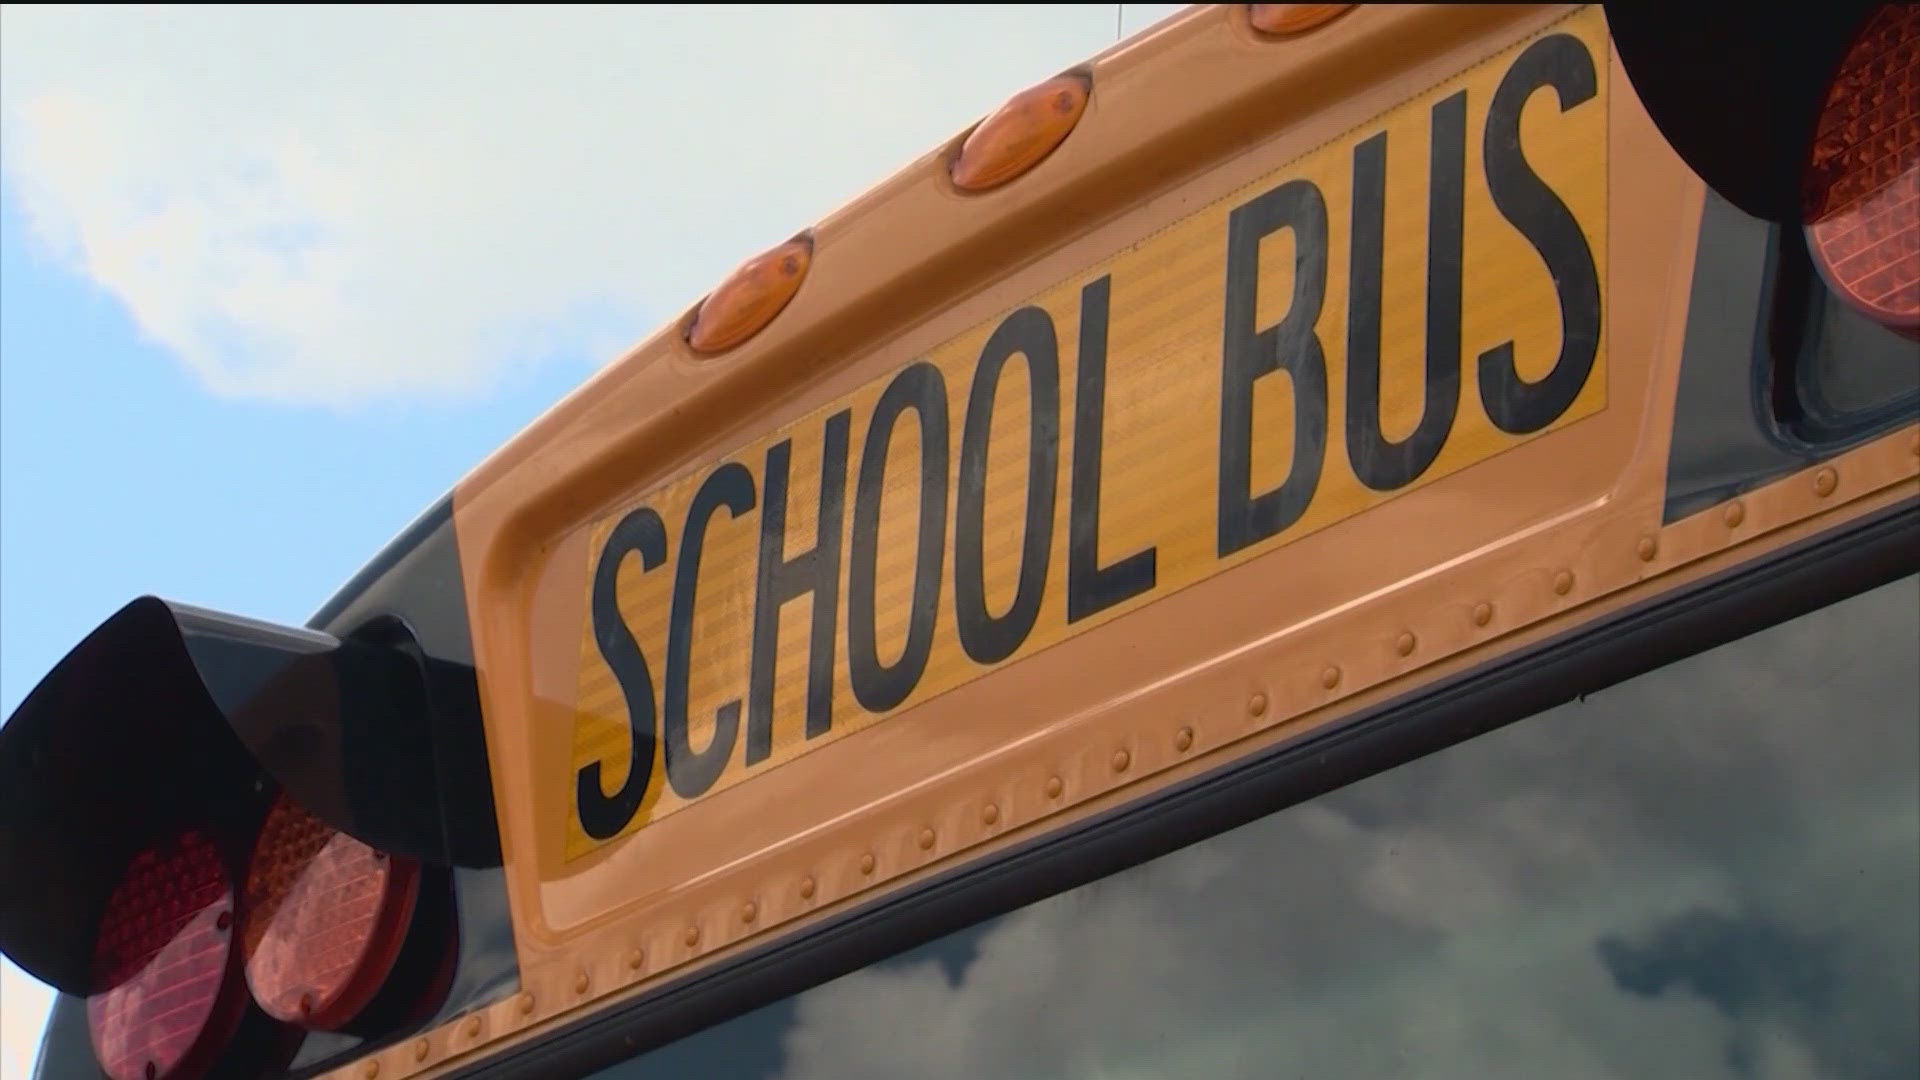 Hays CISD said the school bus involved in a major crash on March 22 did not have seatbelts.